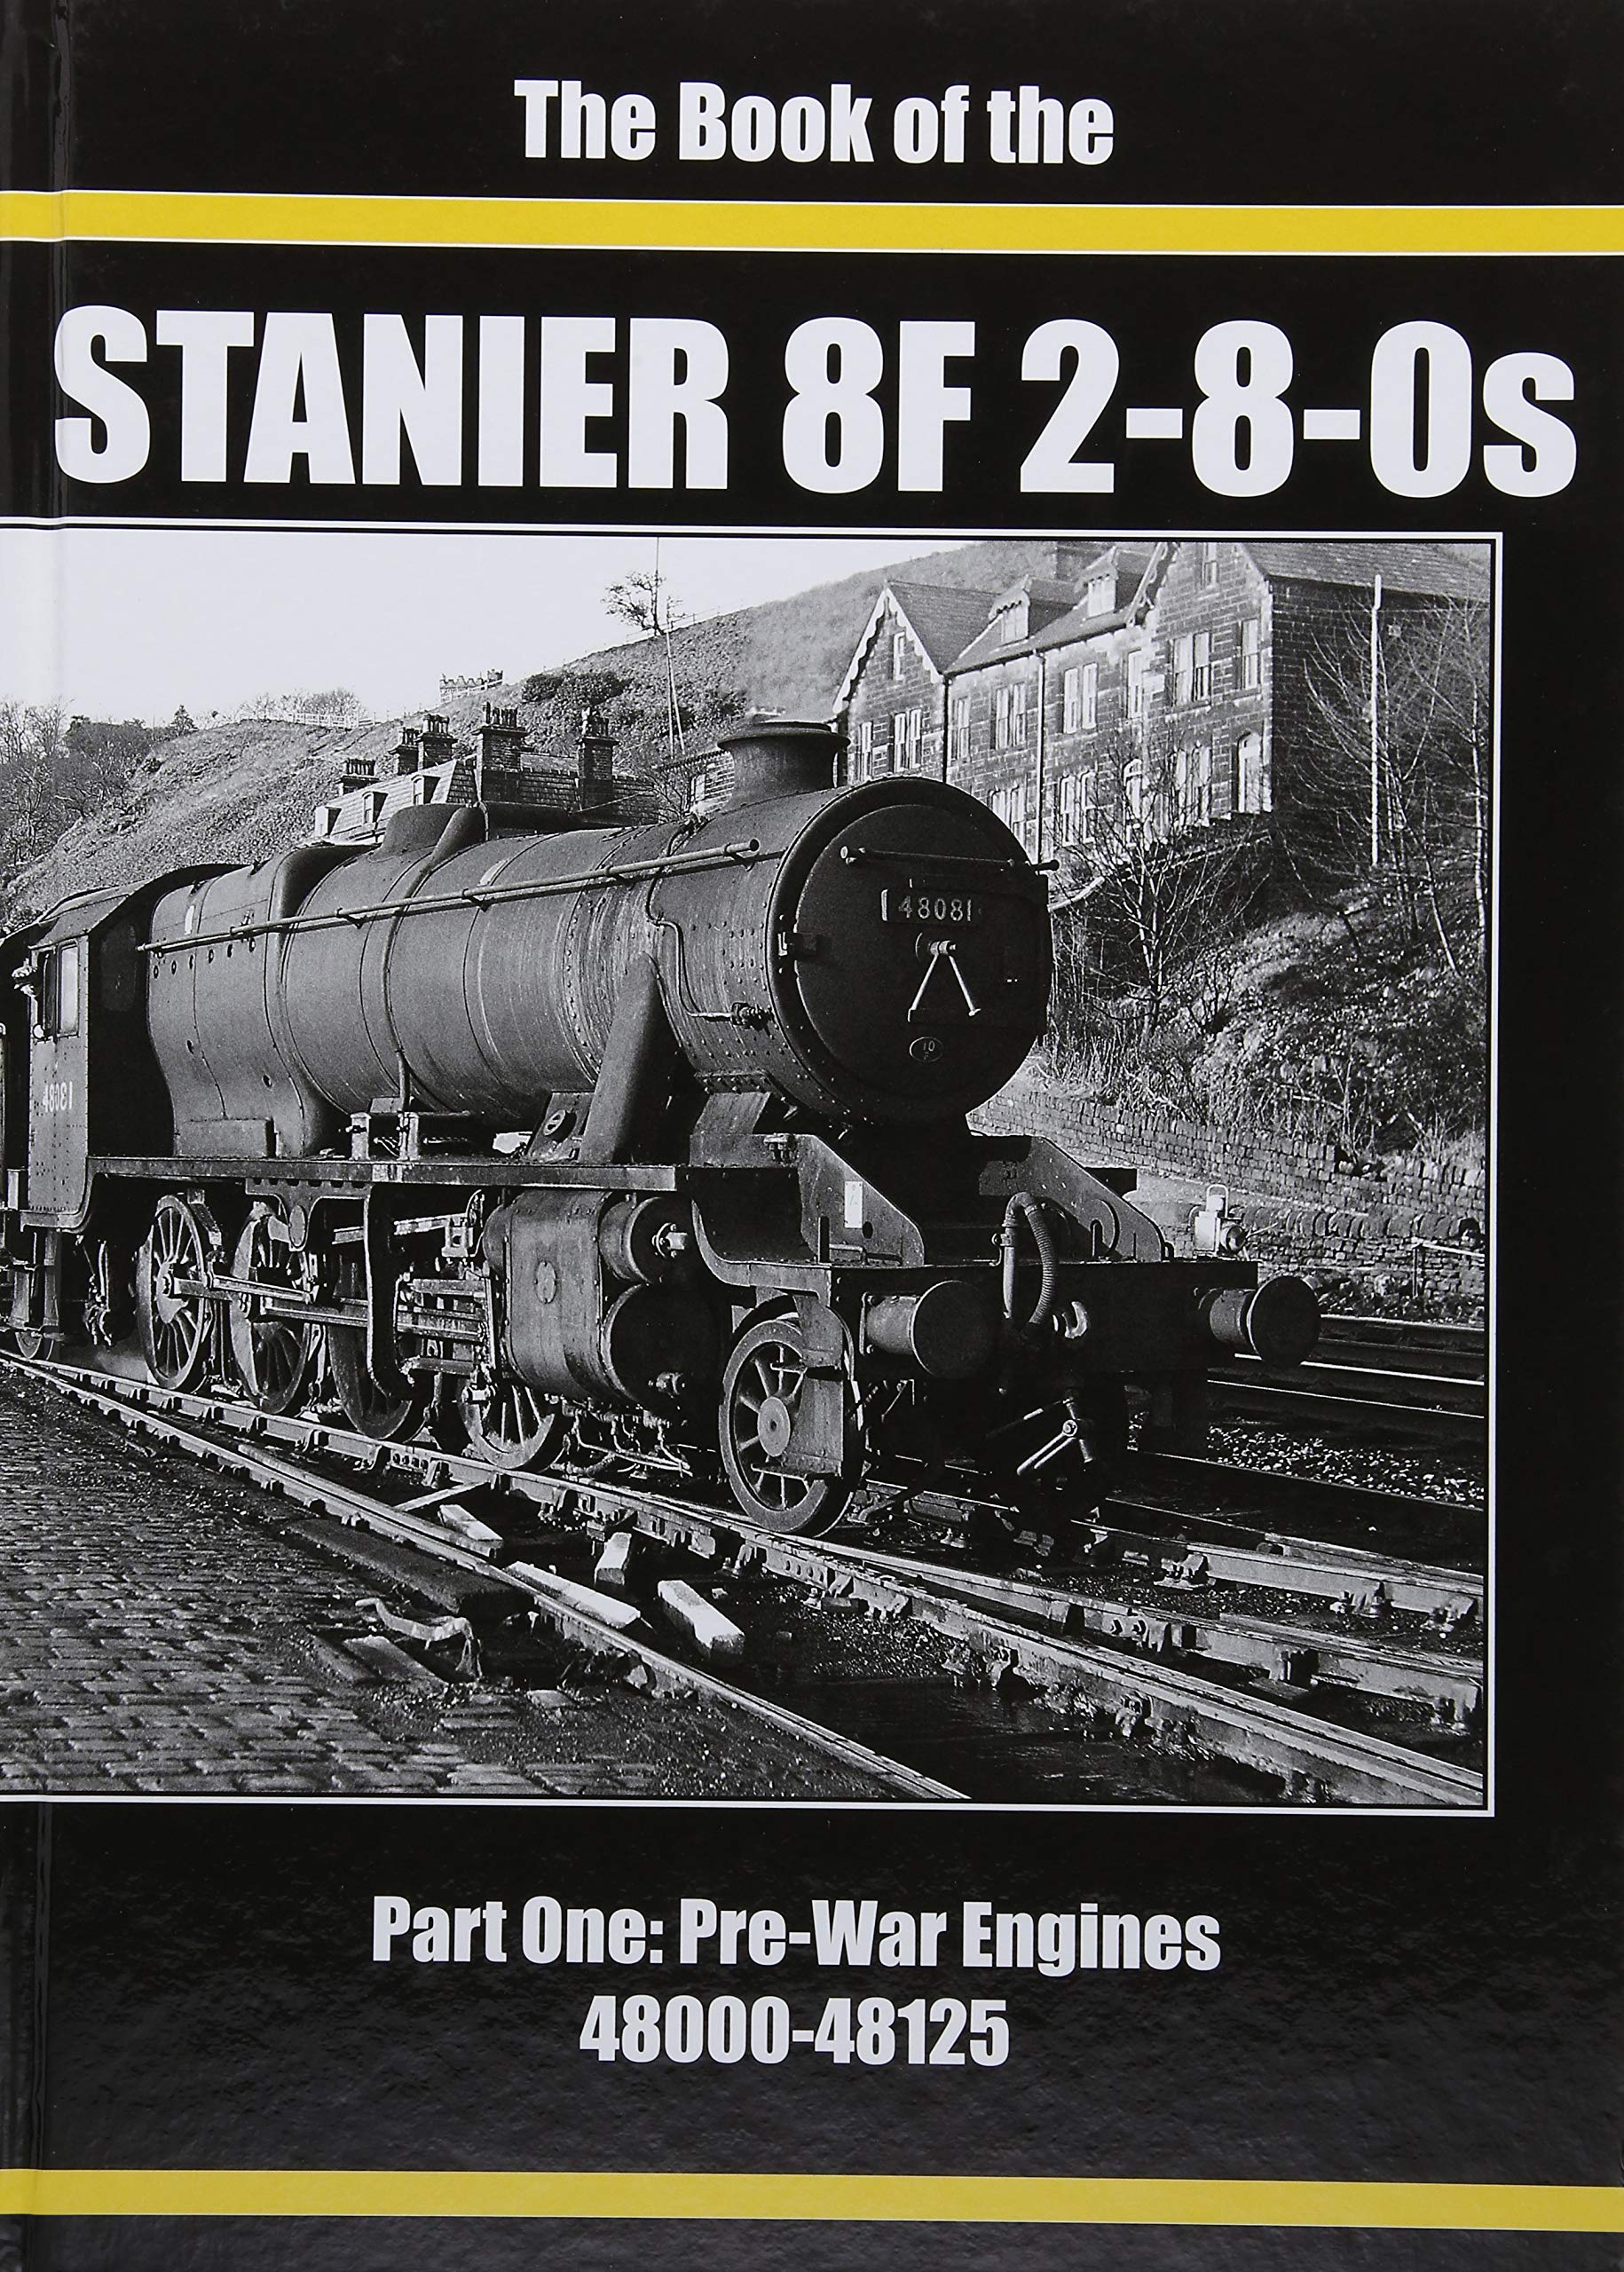 The Book of the STANIER 8F 2-8-0s Part 1: Pre-War Engines 48000 - 48125